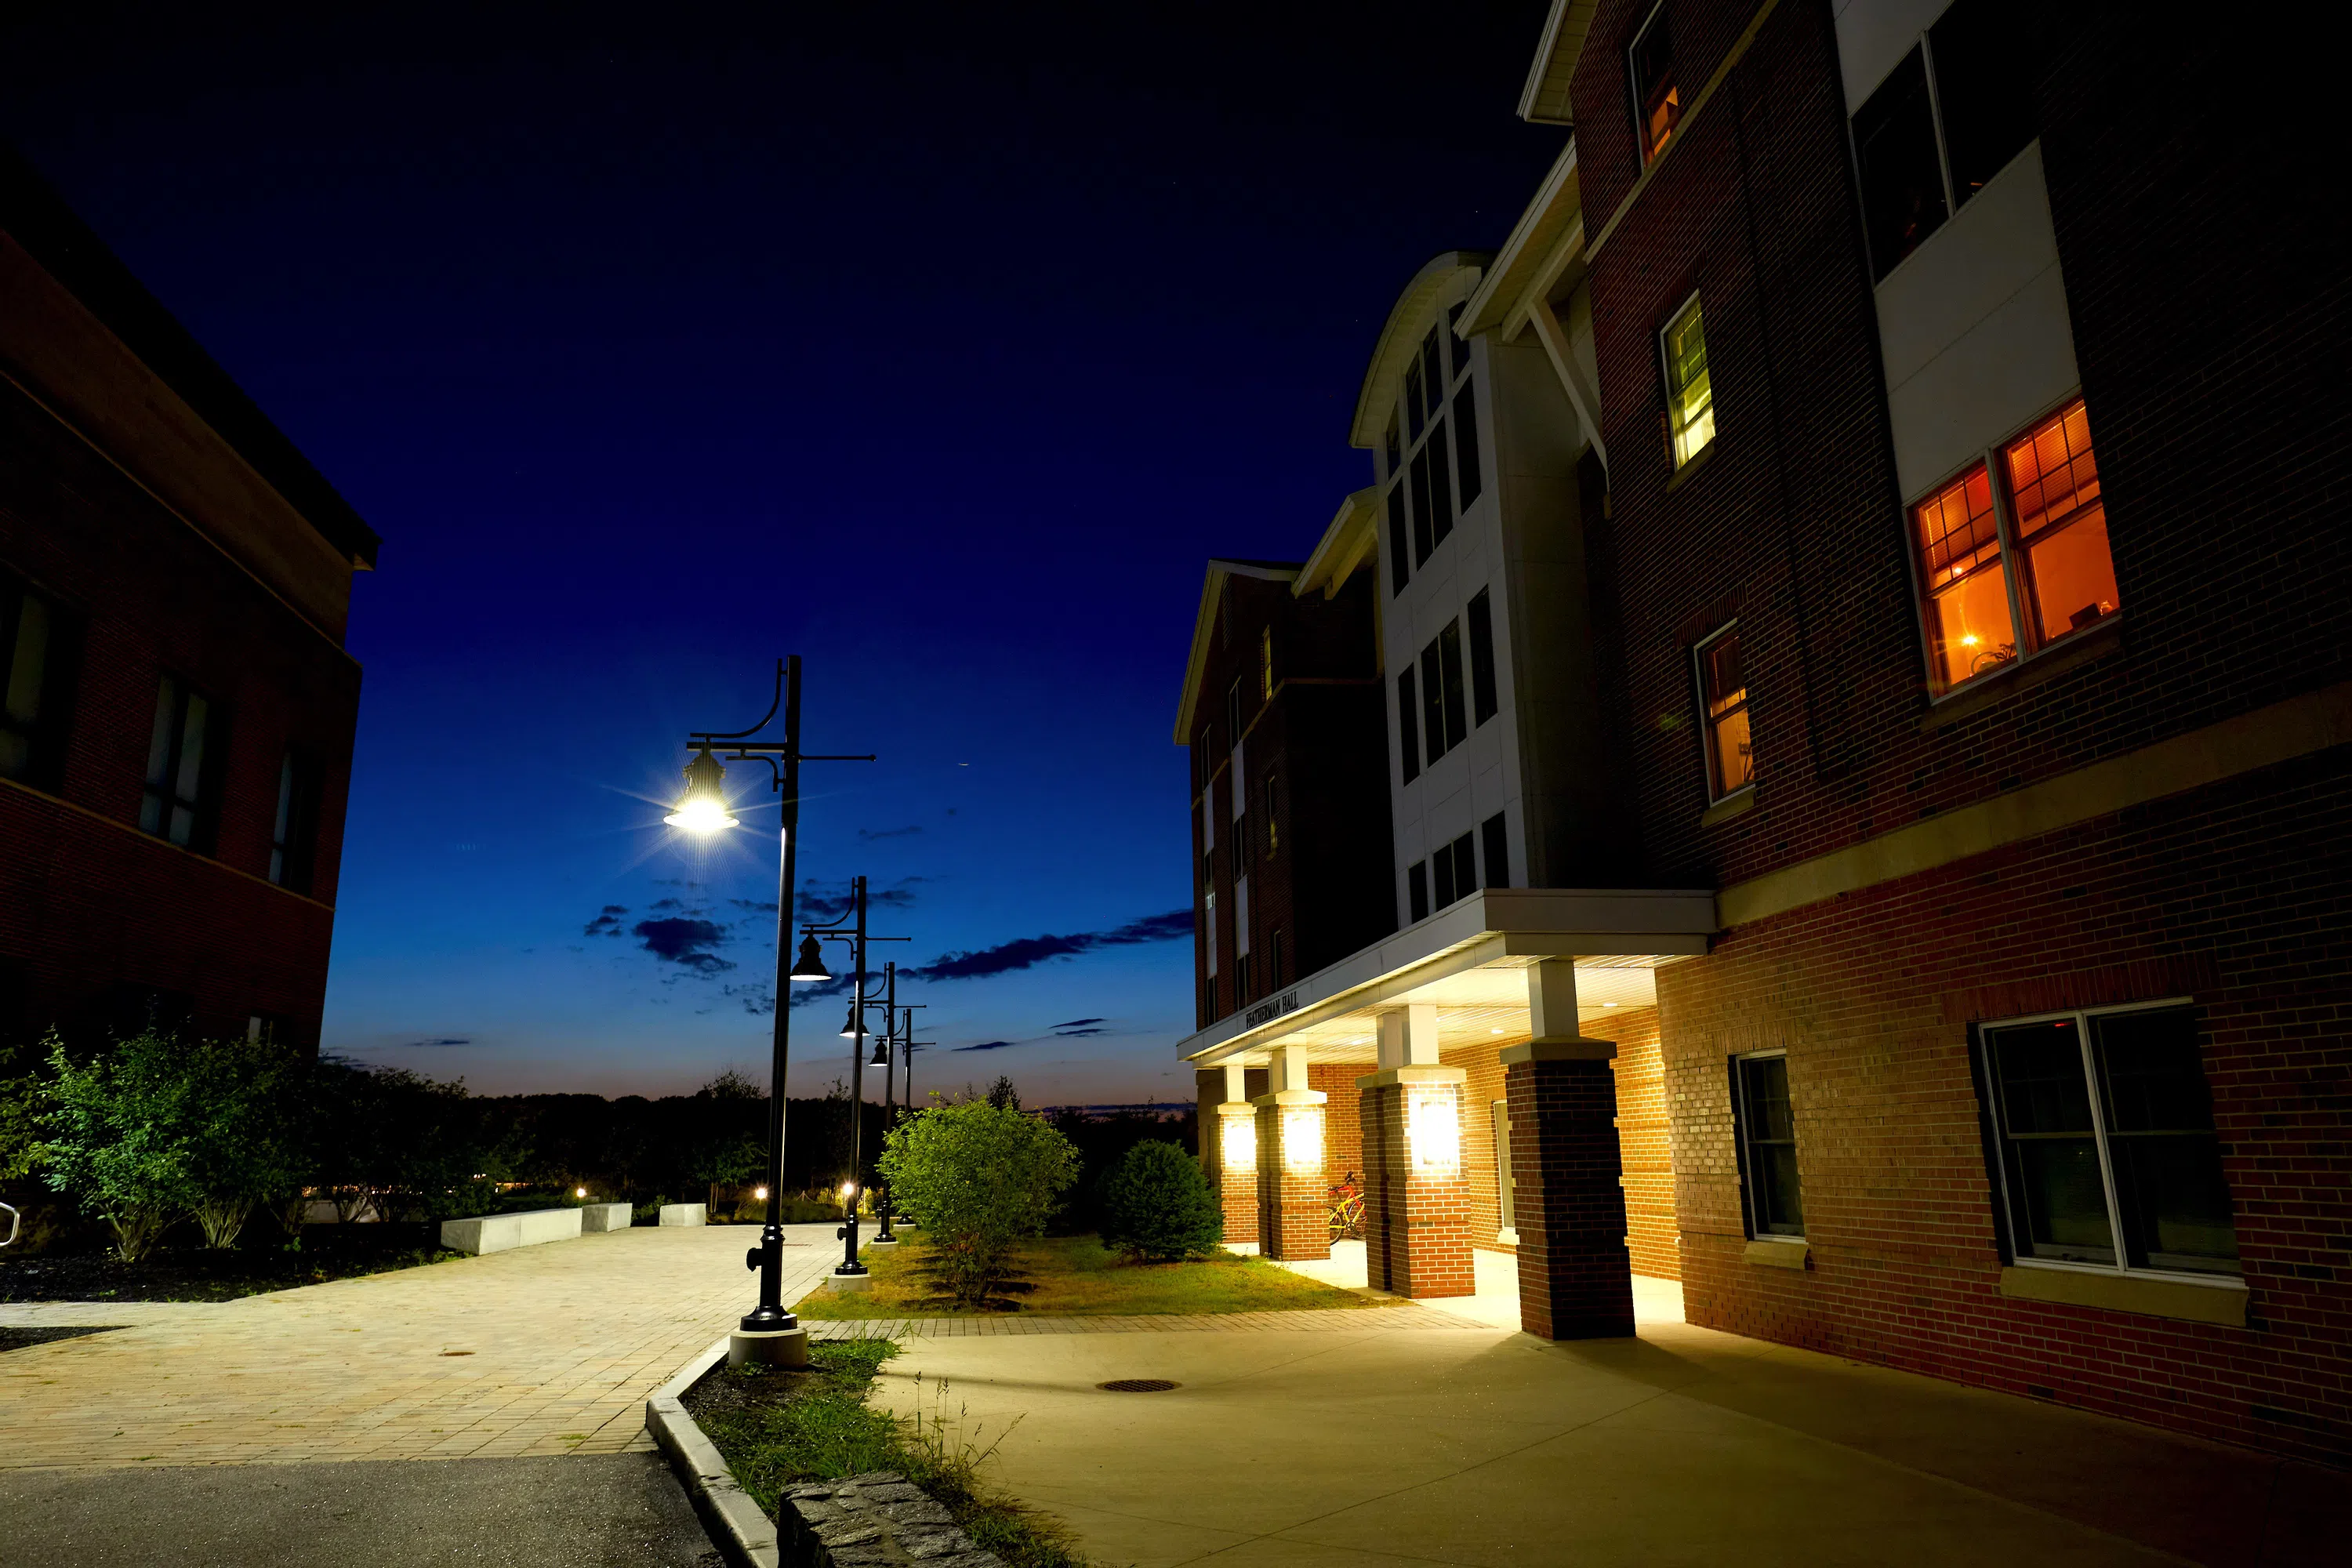 A brick building is illuminated with lights with stone walkway in front. Evening sky in the background